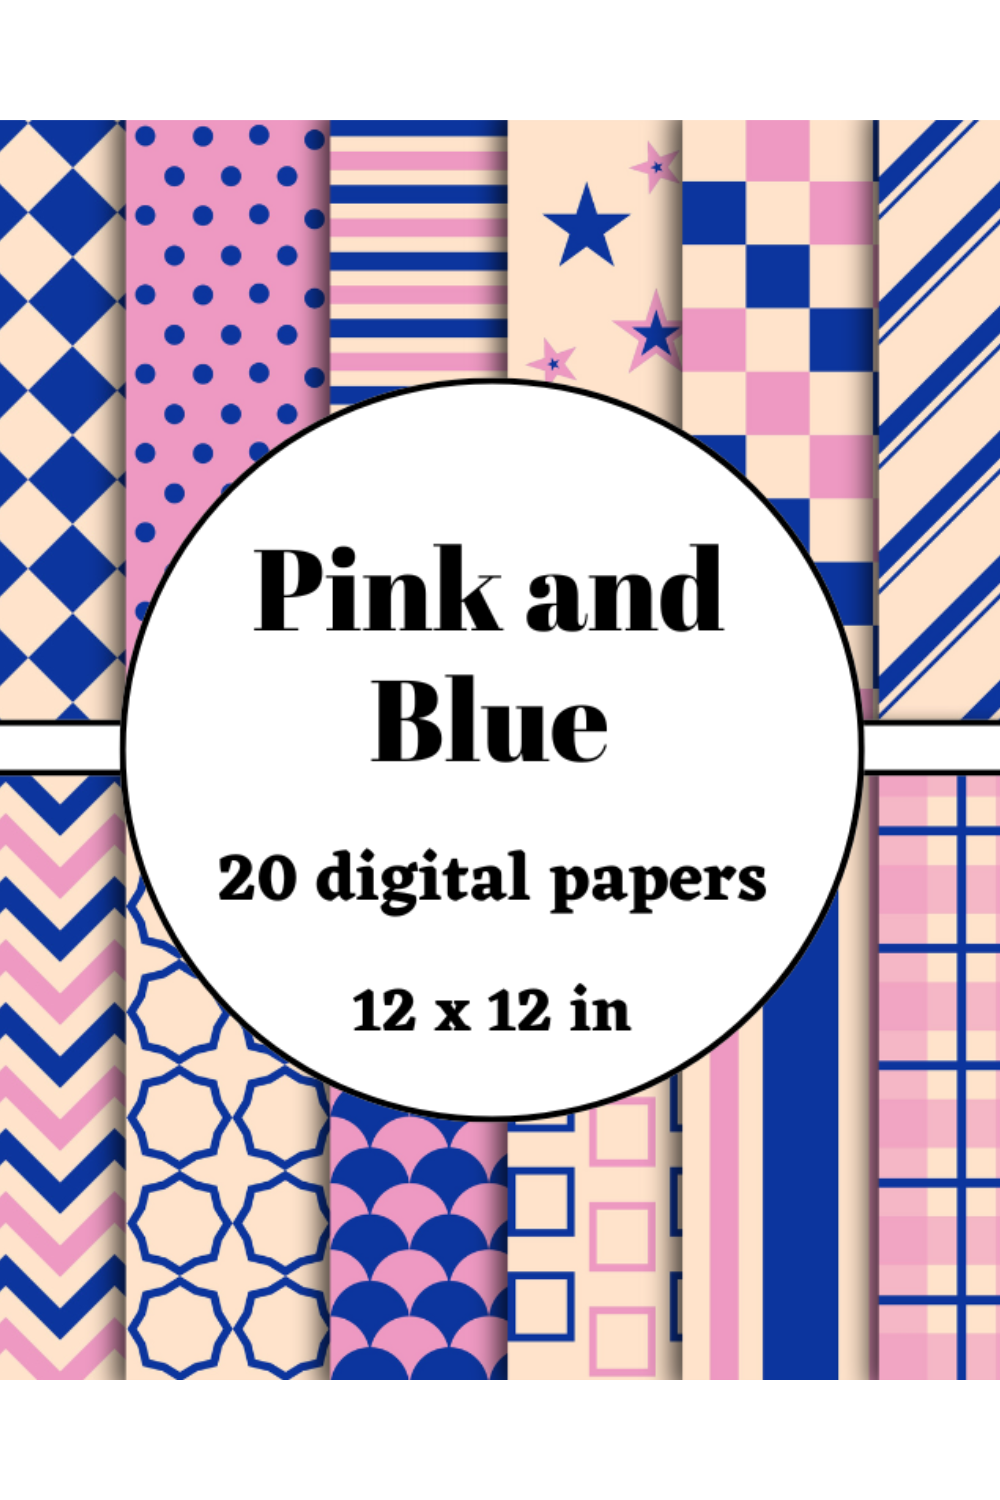 pink and blue digital papers pinterest preview image.